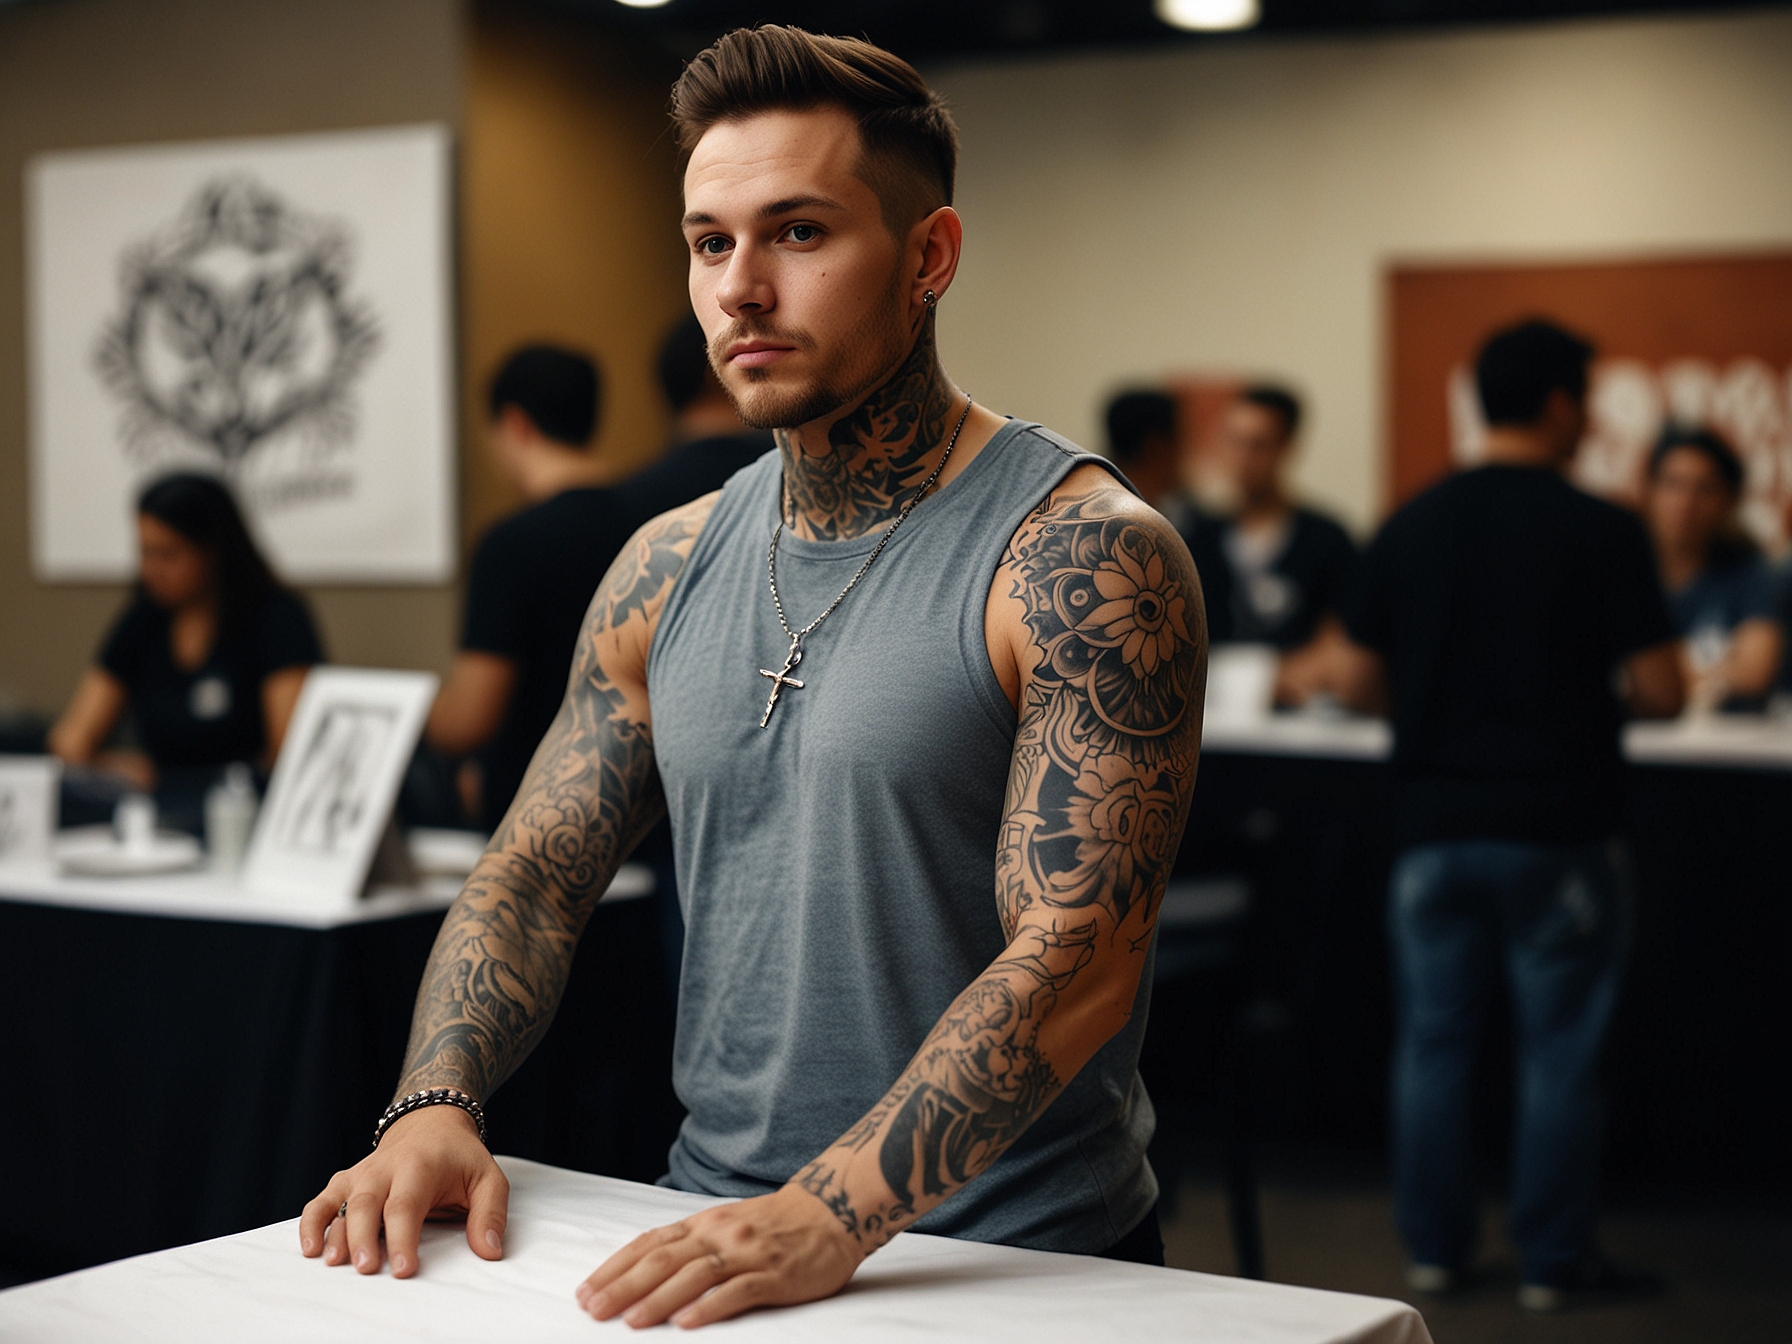 A participant proudly displays their intricate sleeve tattoo for a contest at the Toronto Tattoo Convention, capturing the event's competitive and community spirit.